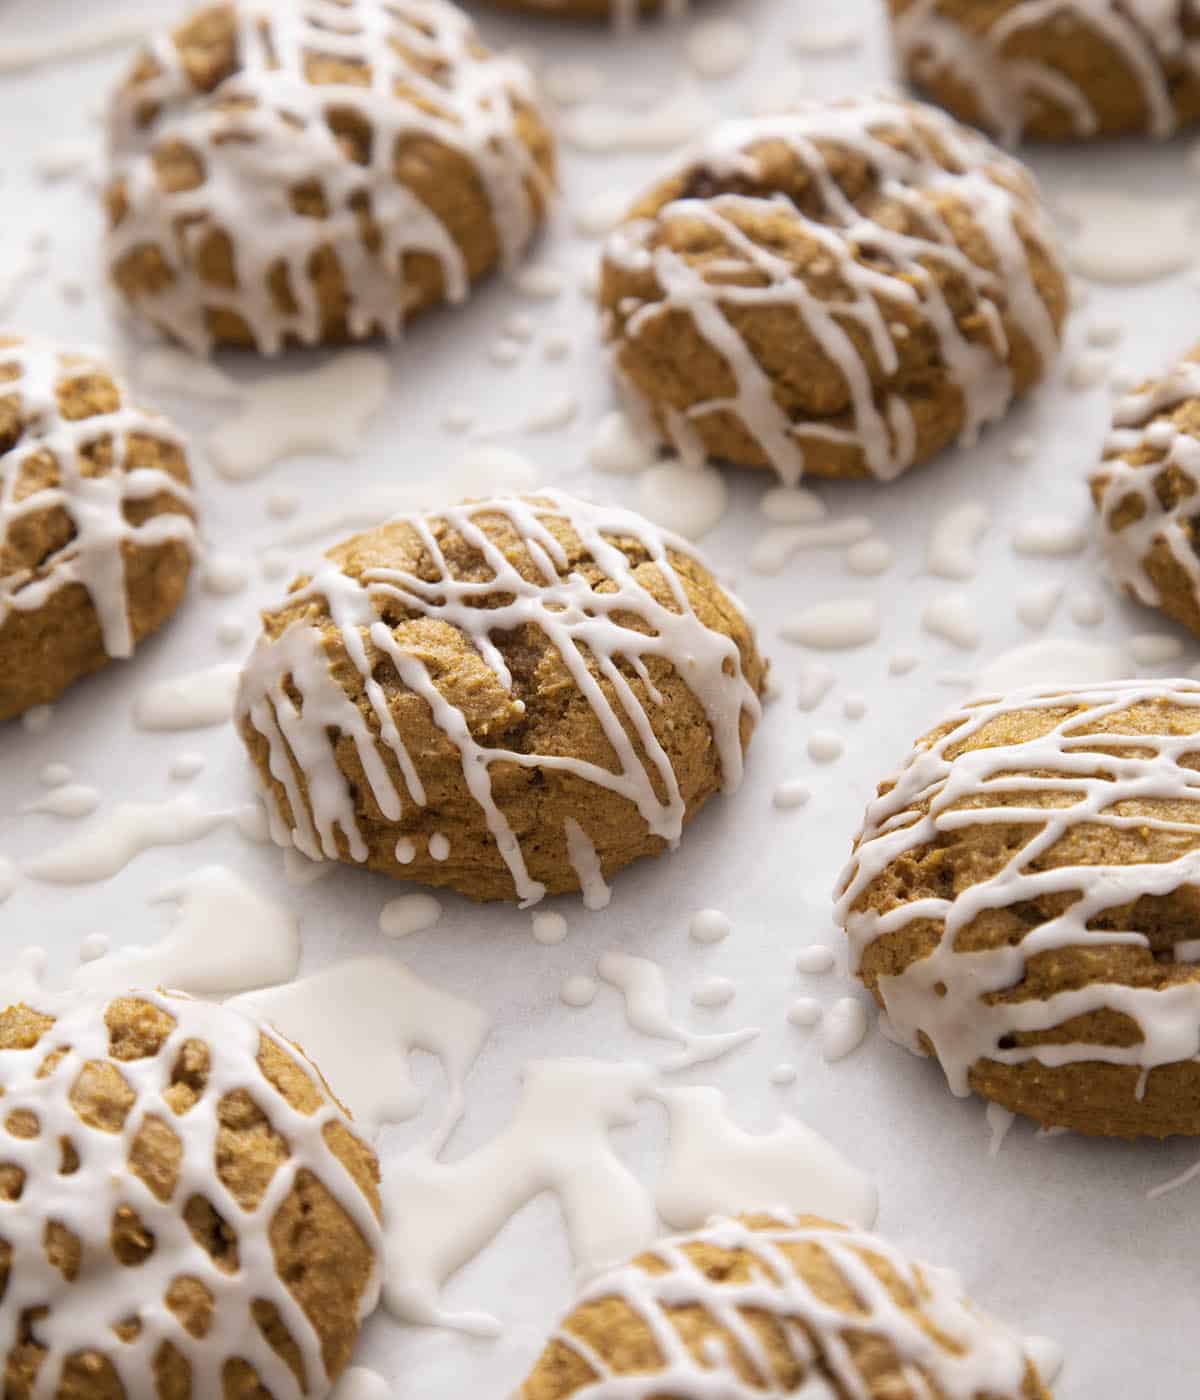 A group of pumpkin cookies on white paper.